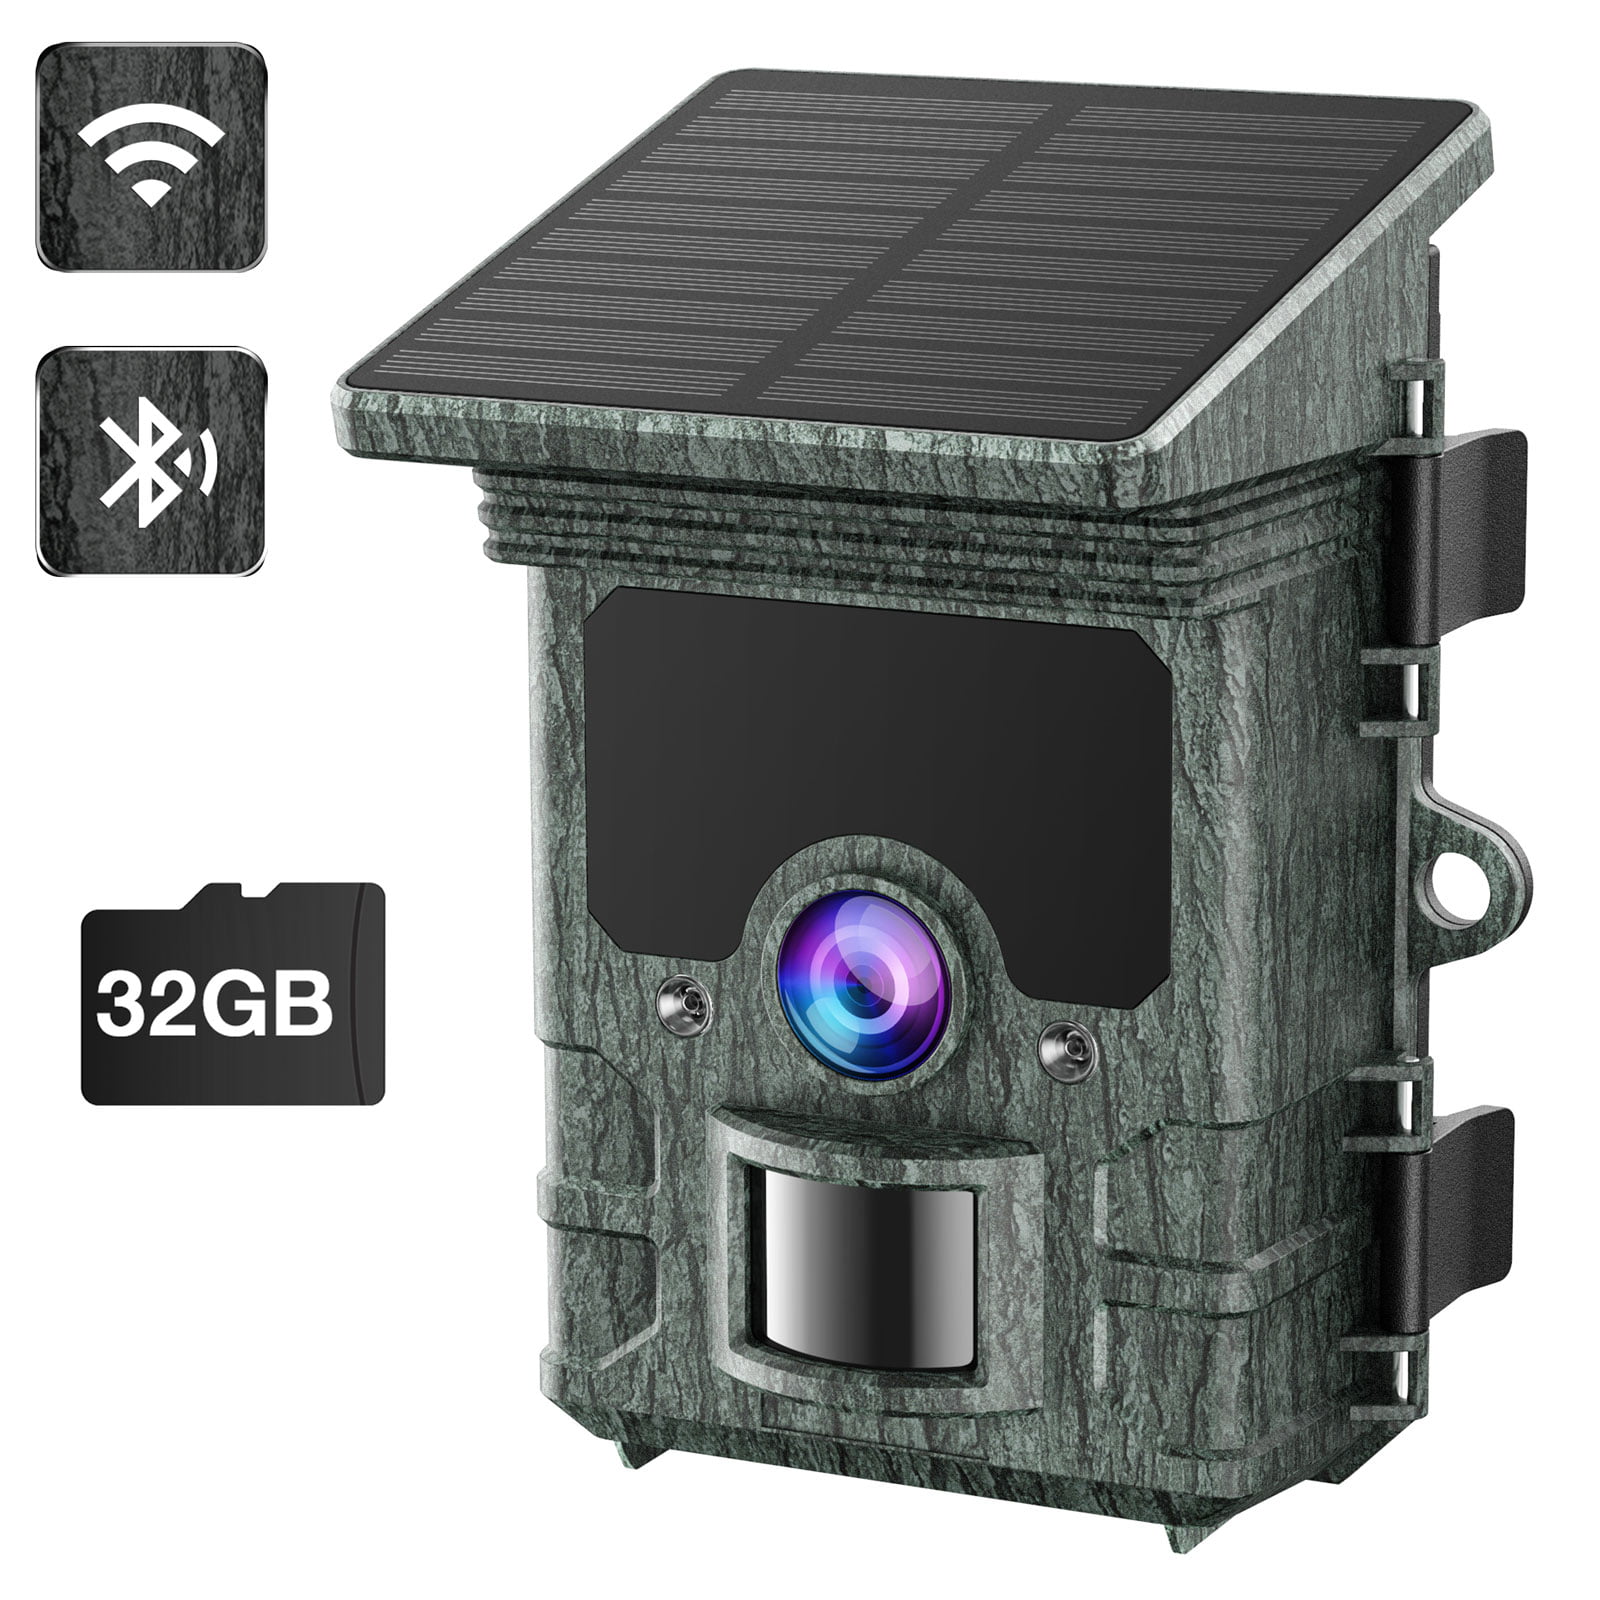 Solar Trail Camera 4K 30MP WiFi Scouting Hunting Game Cam Night Vision Wildlife